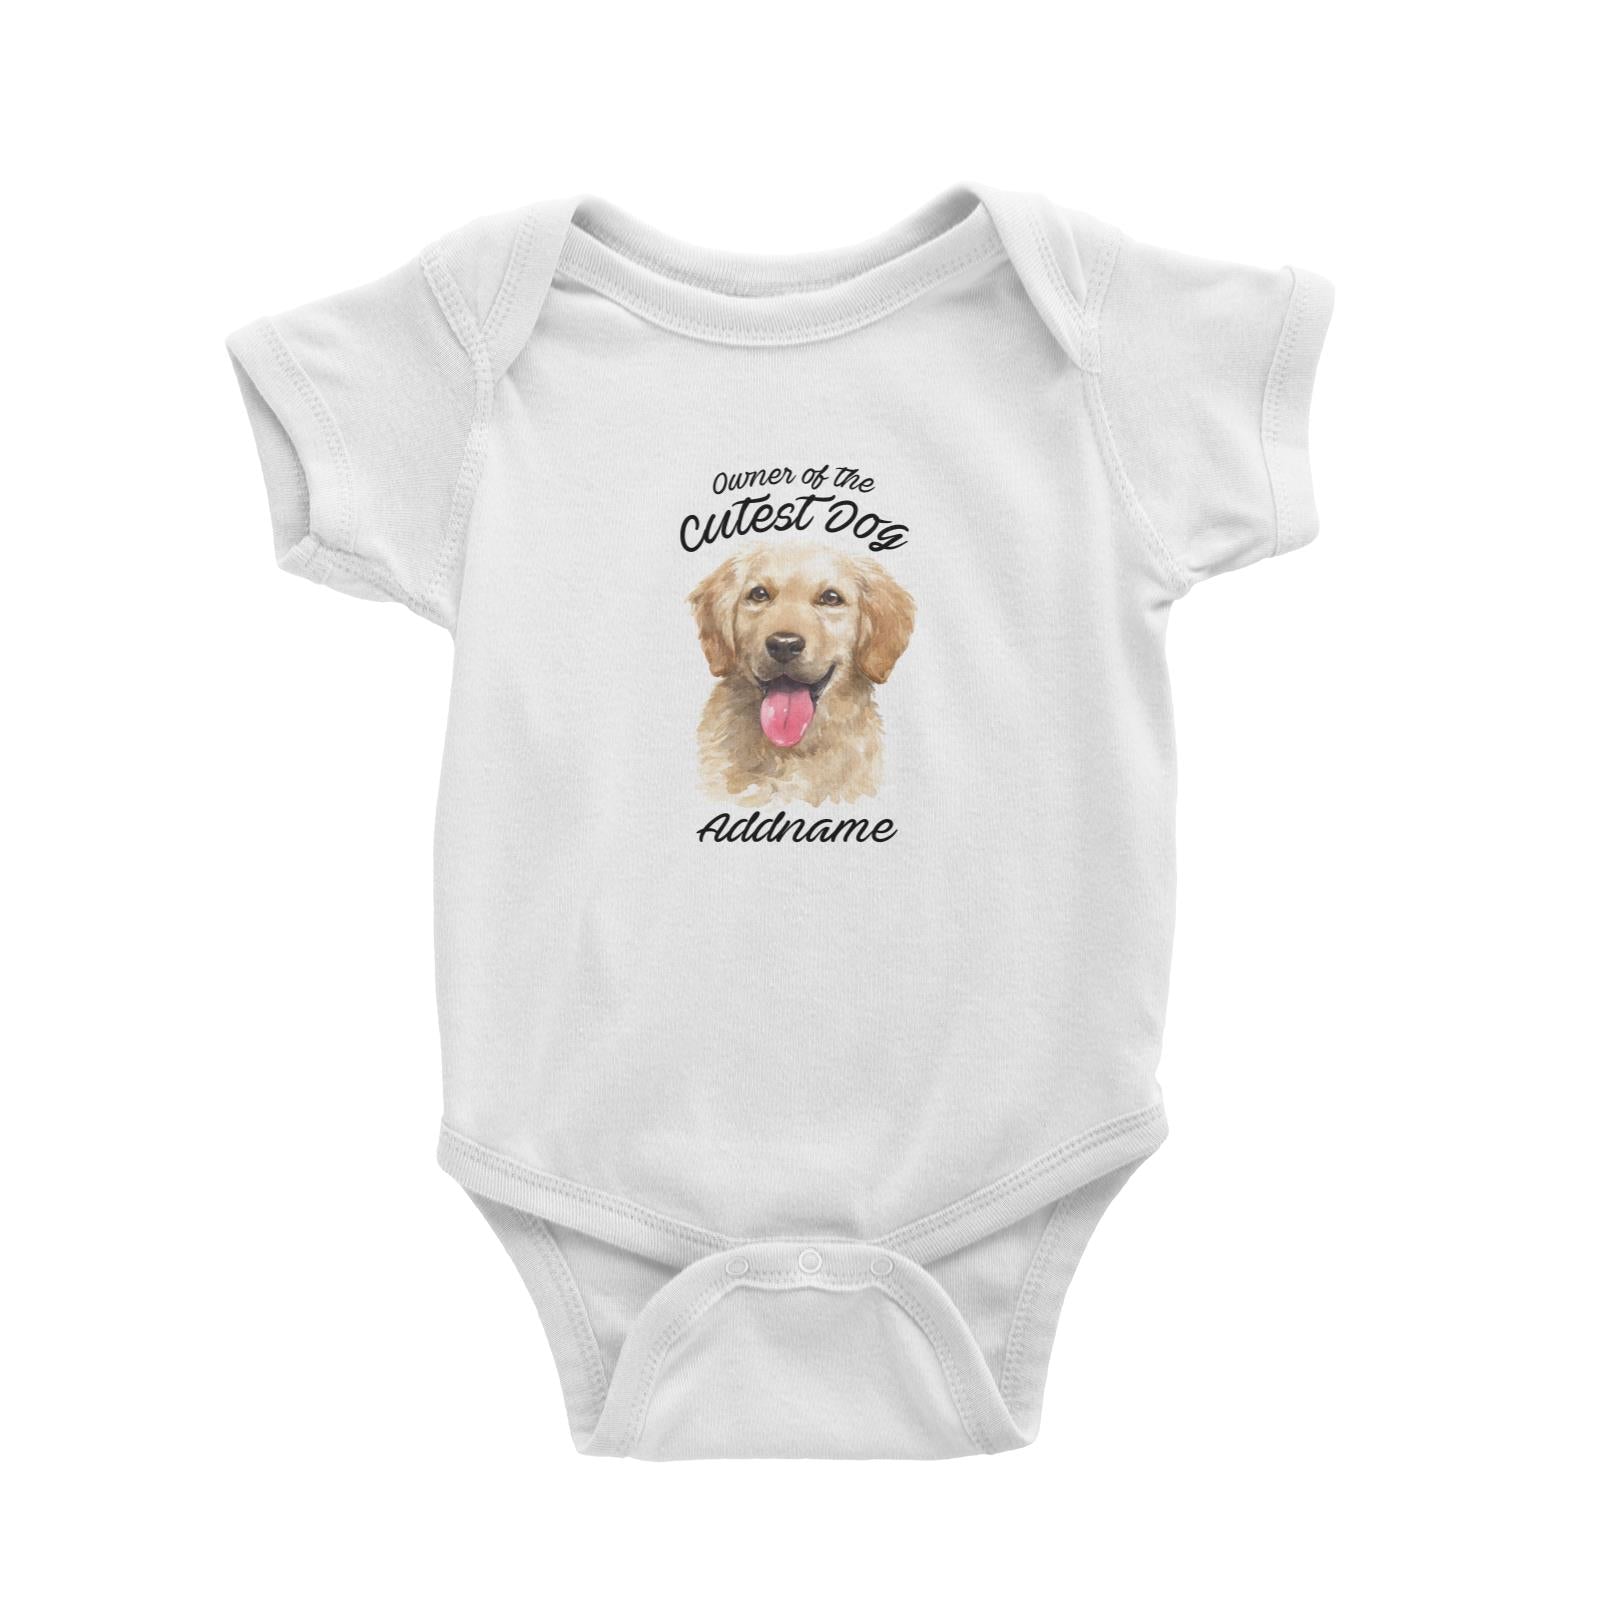 Watercolor Dog Owner Of The Cutest Dog Golden Retriever Front Addname Baby Romper